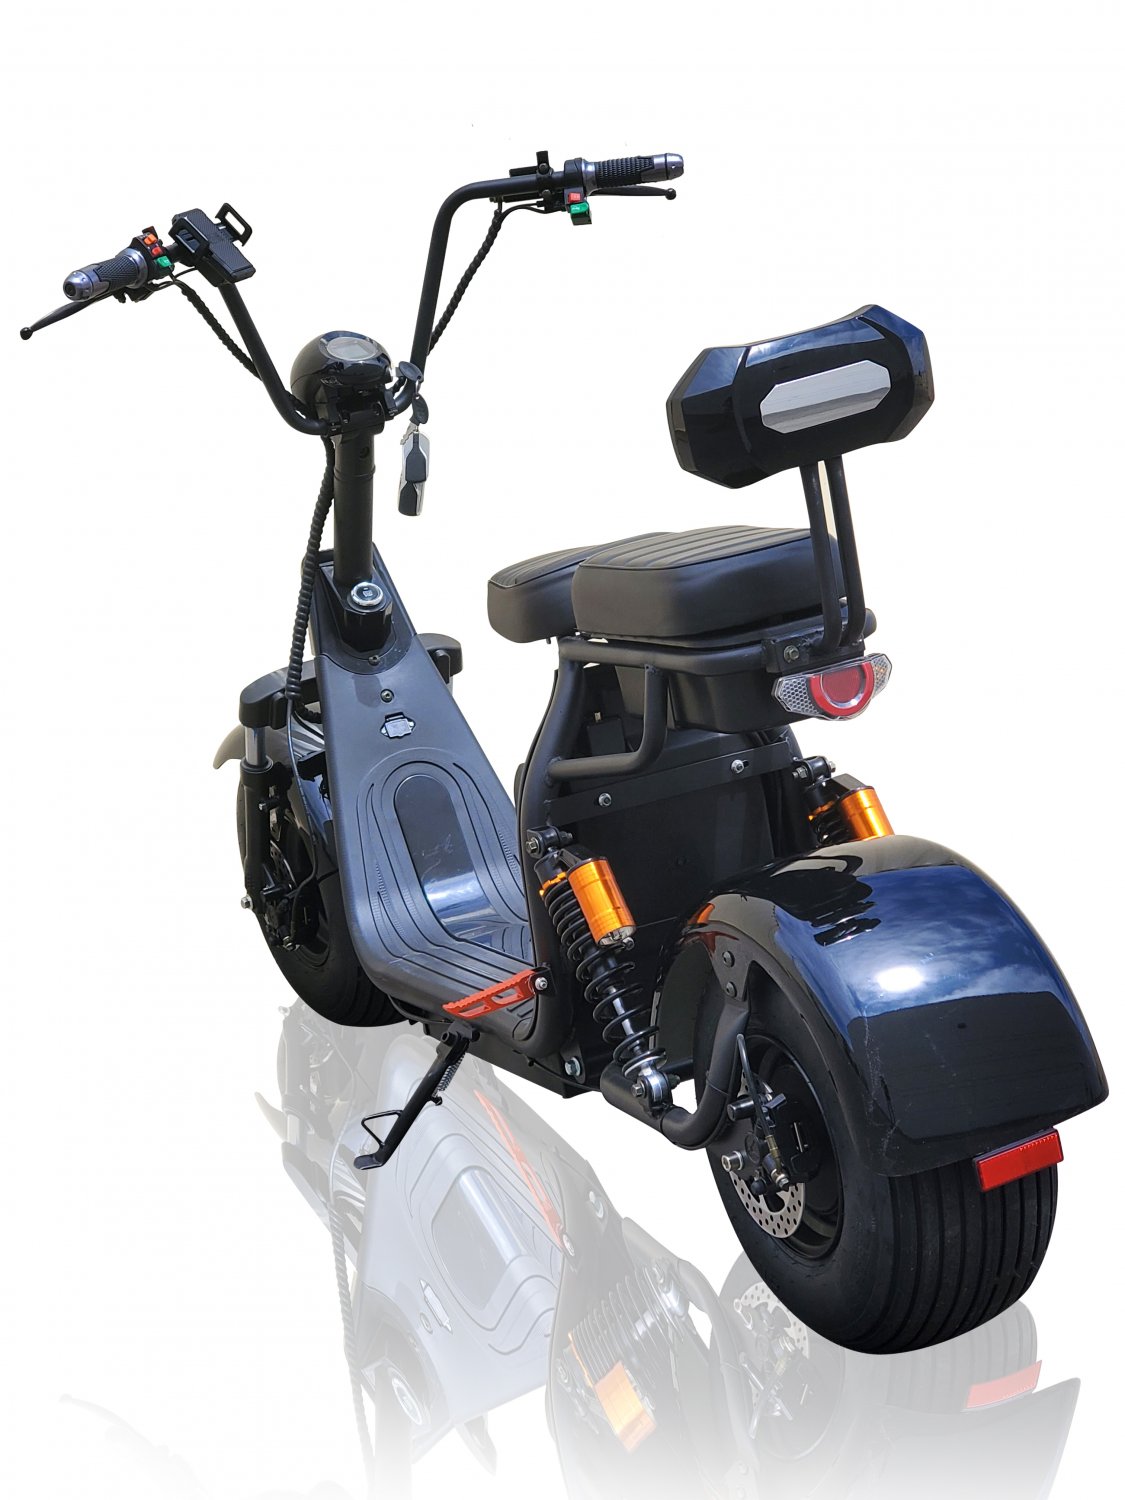 NEW 2000W Double Seat Double Battery Fat Tire CityCoco Scooter Moped 40AH Long Range Lithium Battery